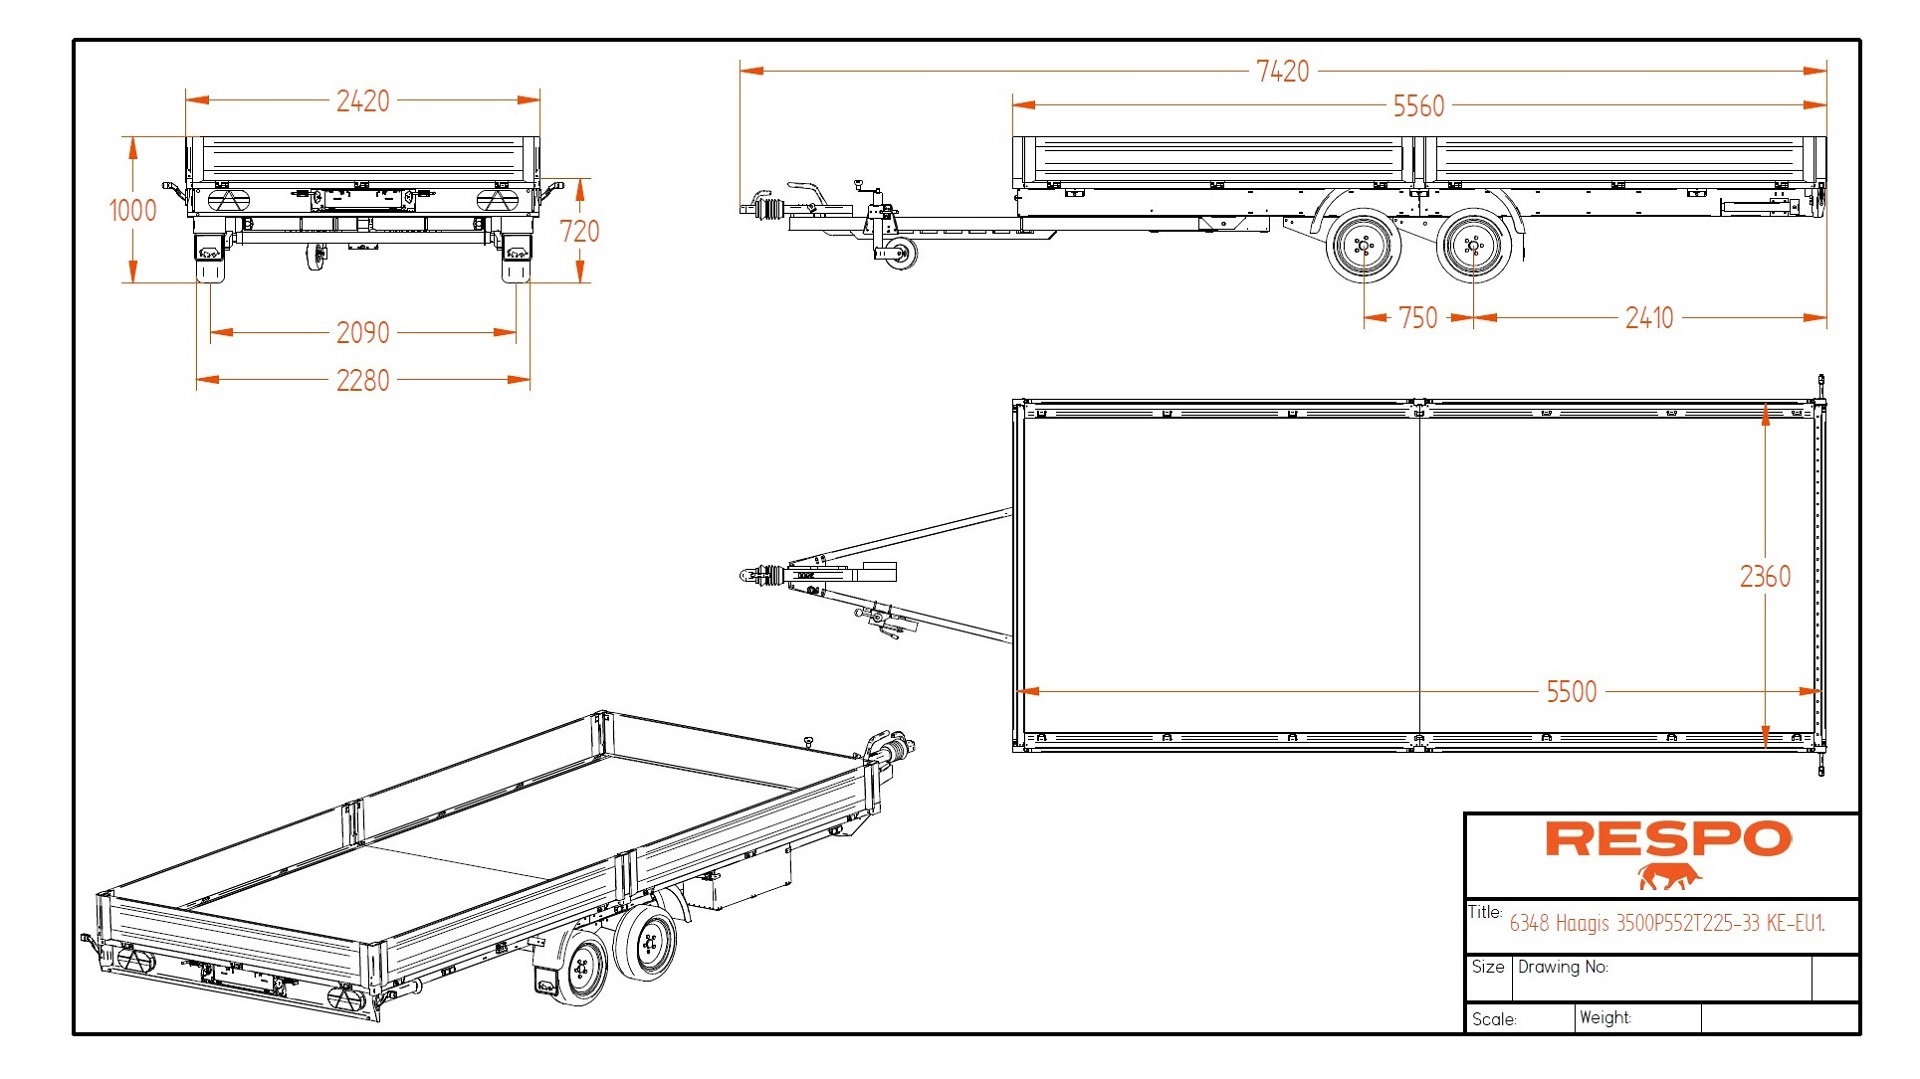 3500P552T225 Flatbed (with accessories)